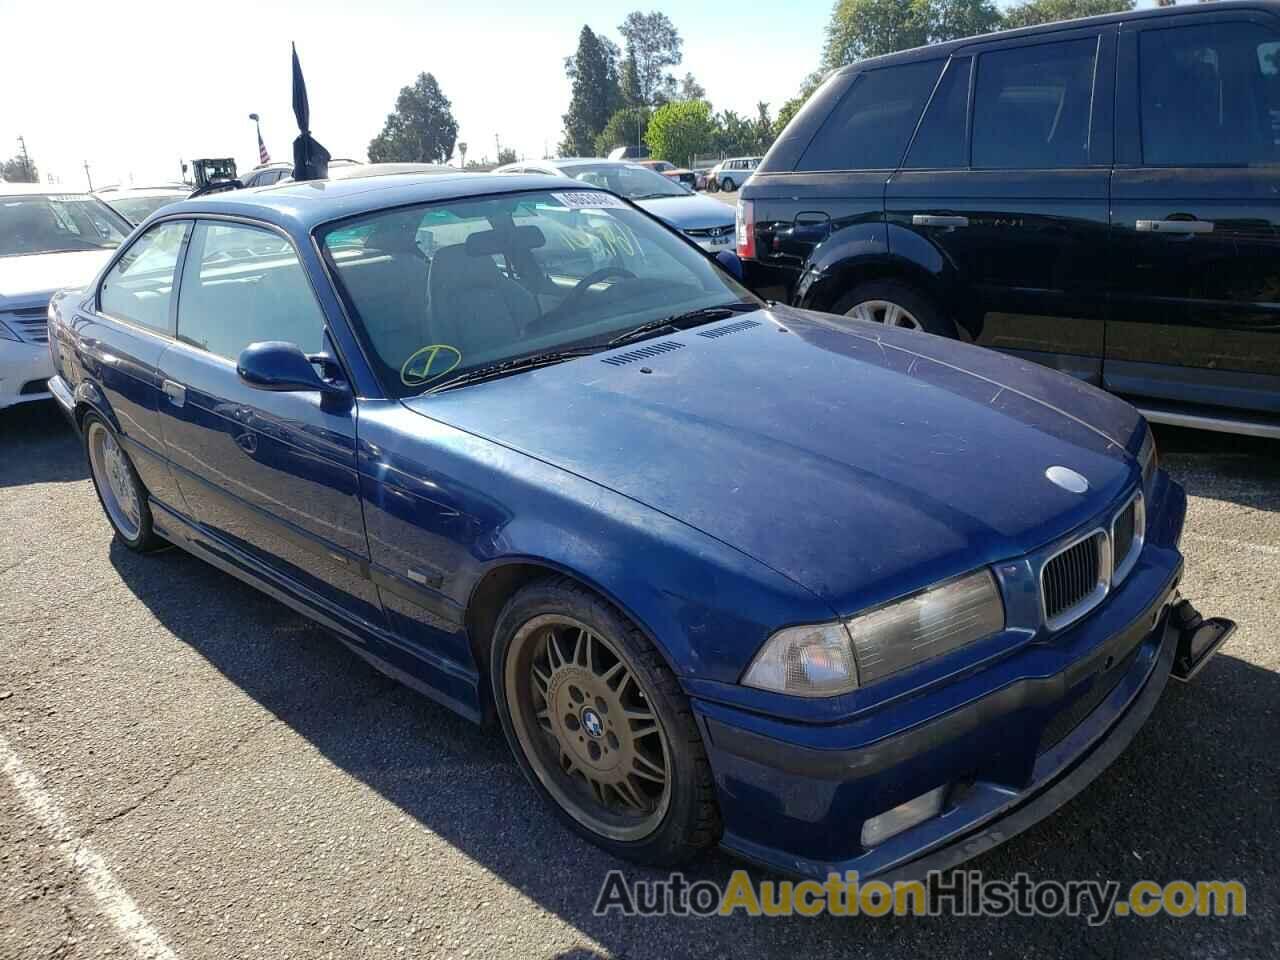 1995 BMW M3, WBSBF932XSEH04622